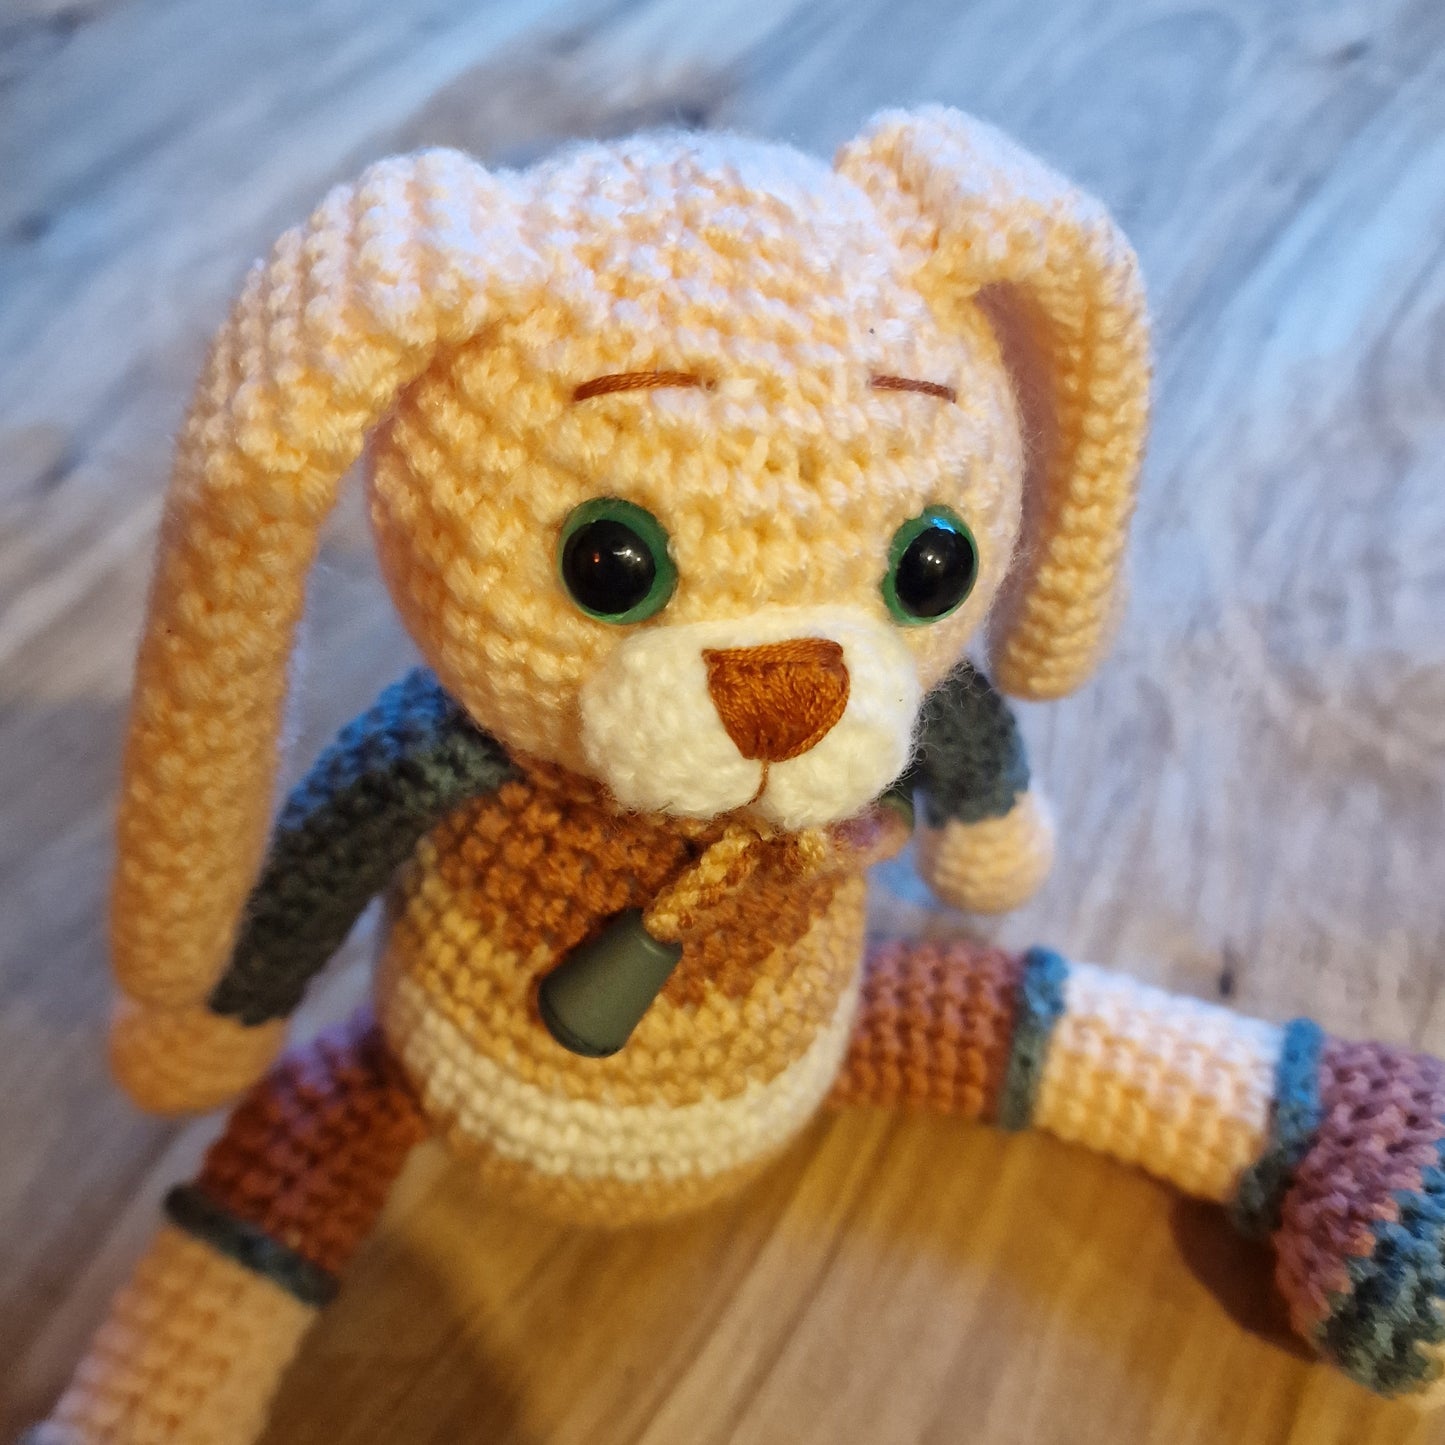 Crocheted toy bunny in pastel colors (AIPU 40)